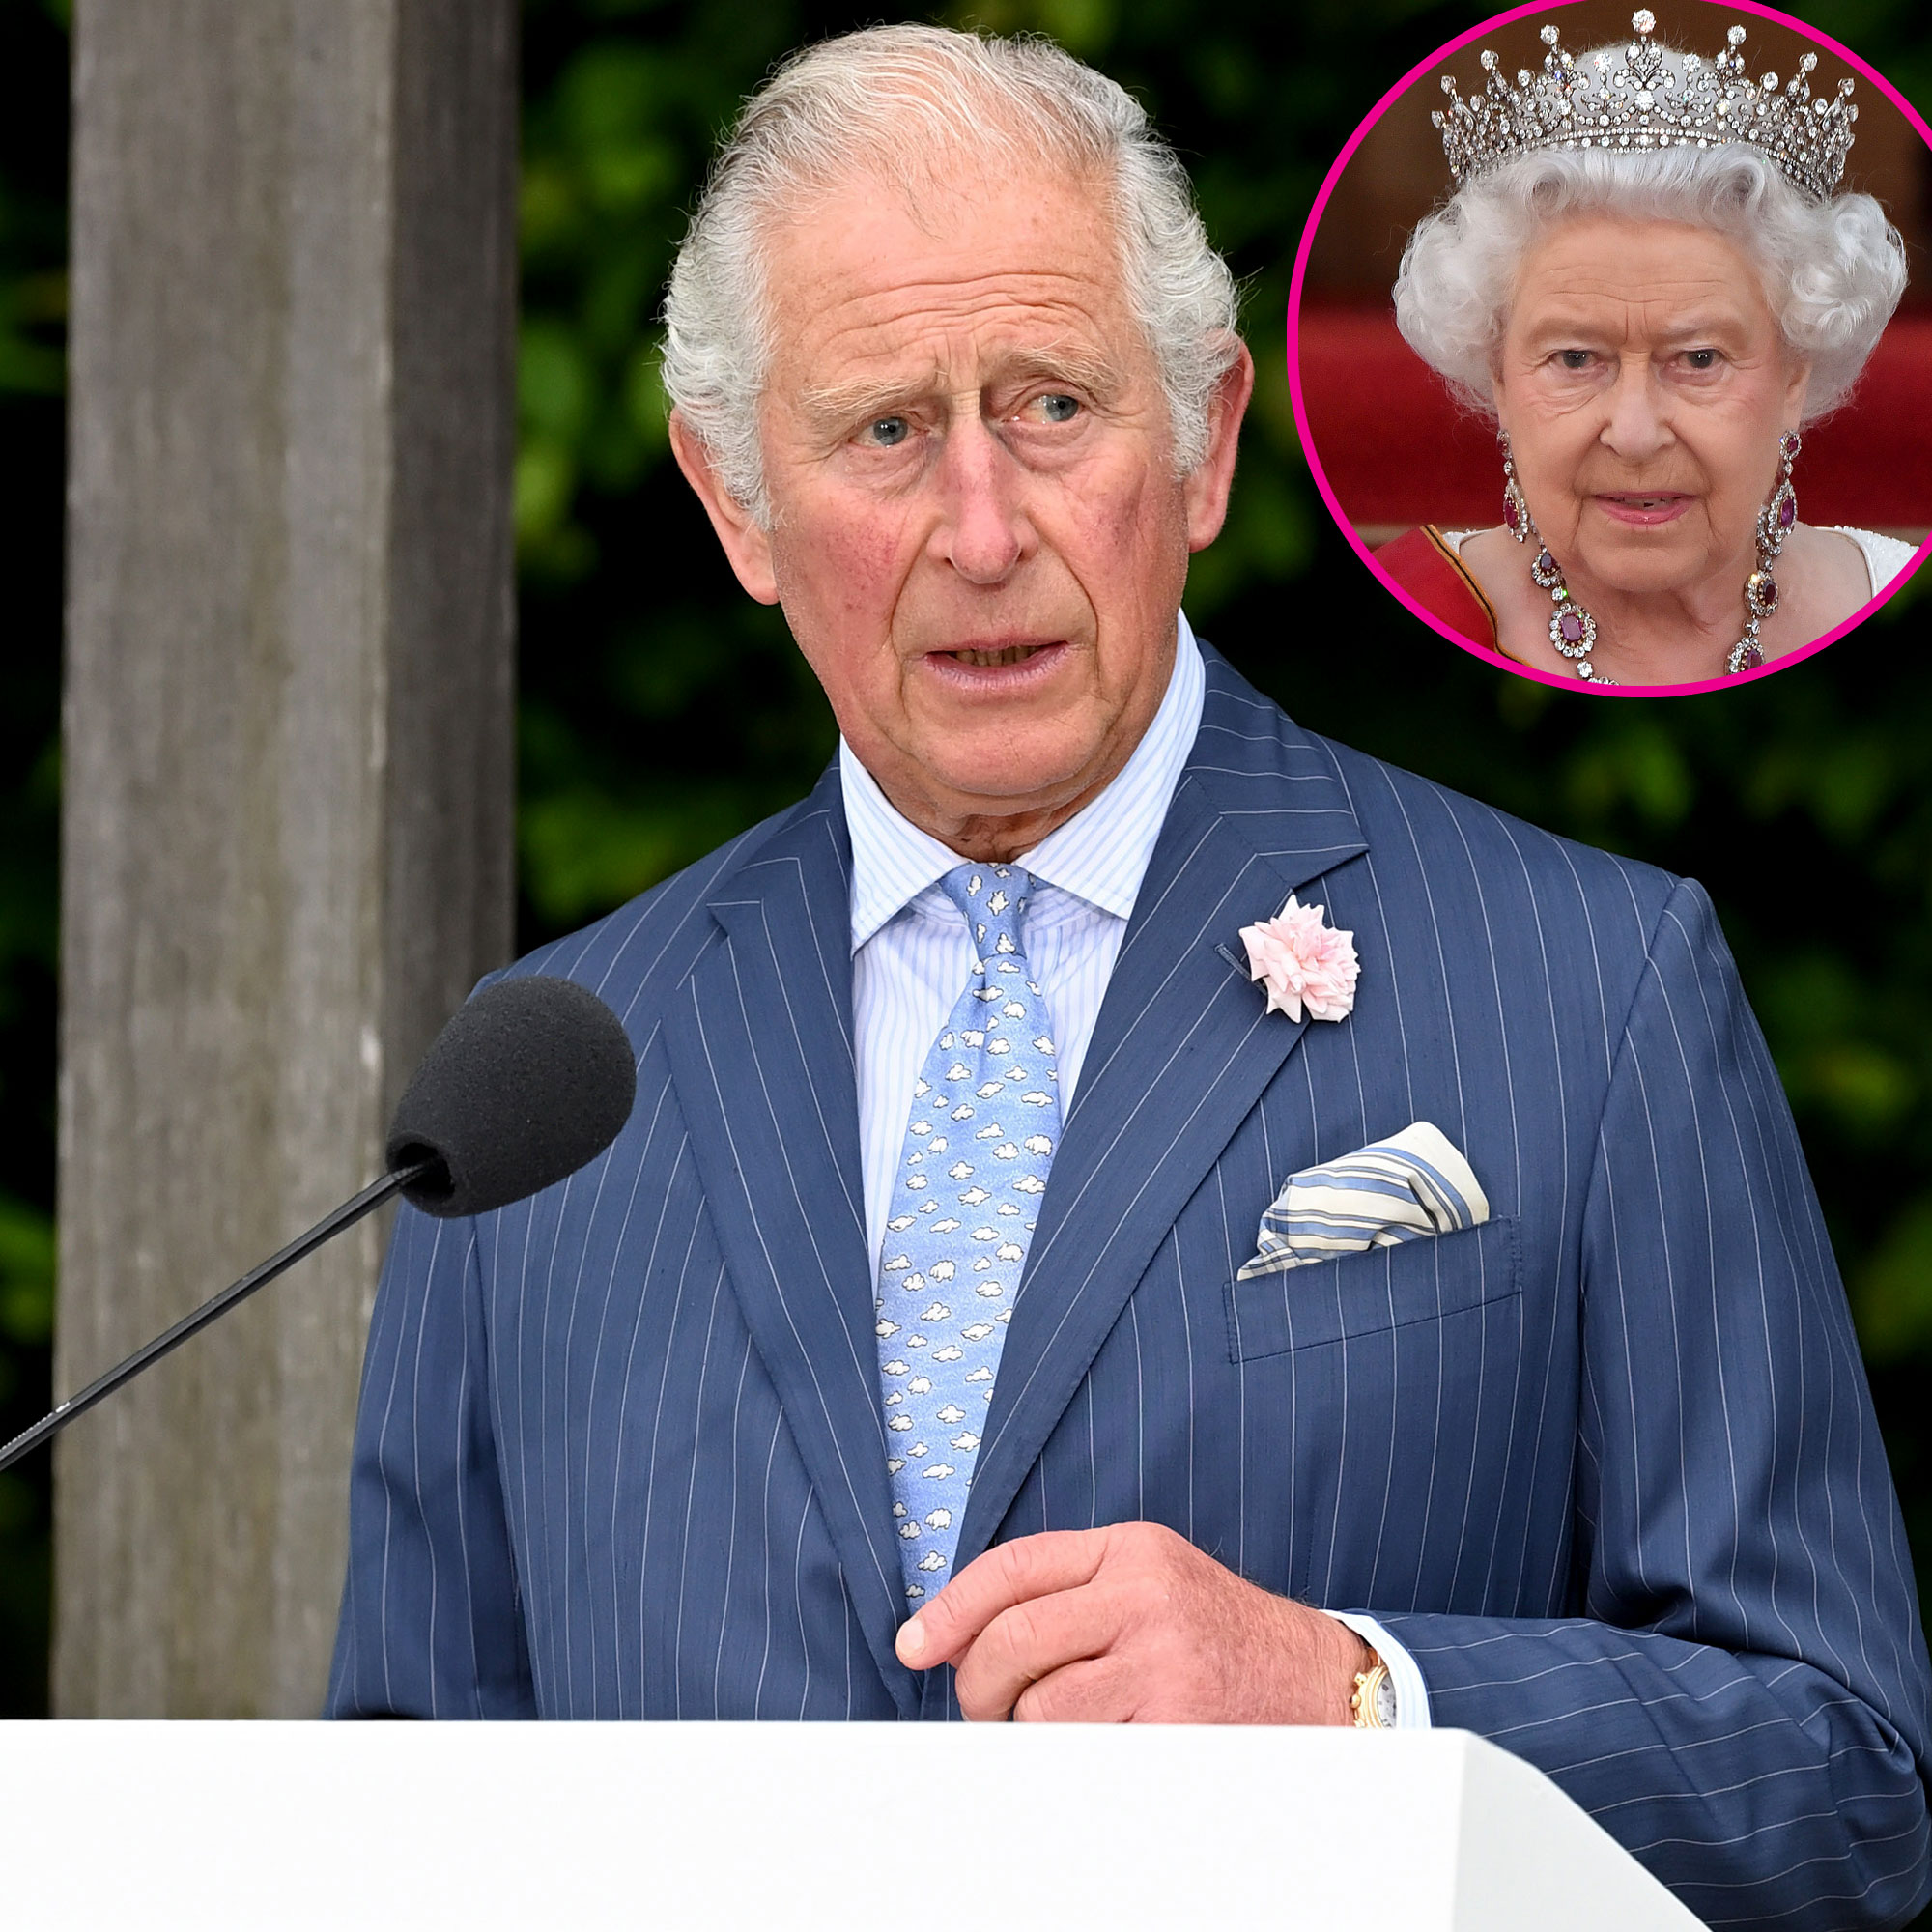 Death of Queen Elizabeth II: Where is Charles now king and what is